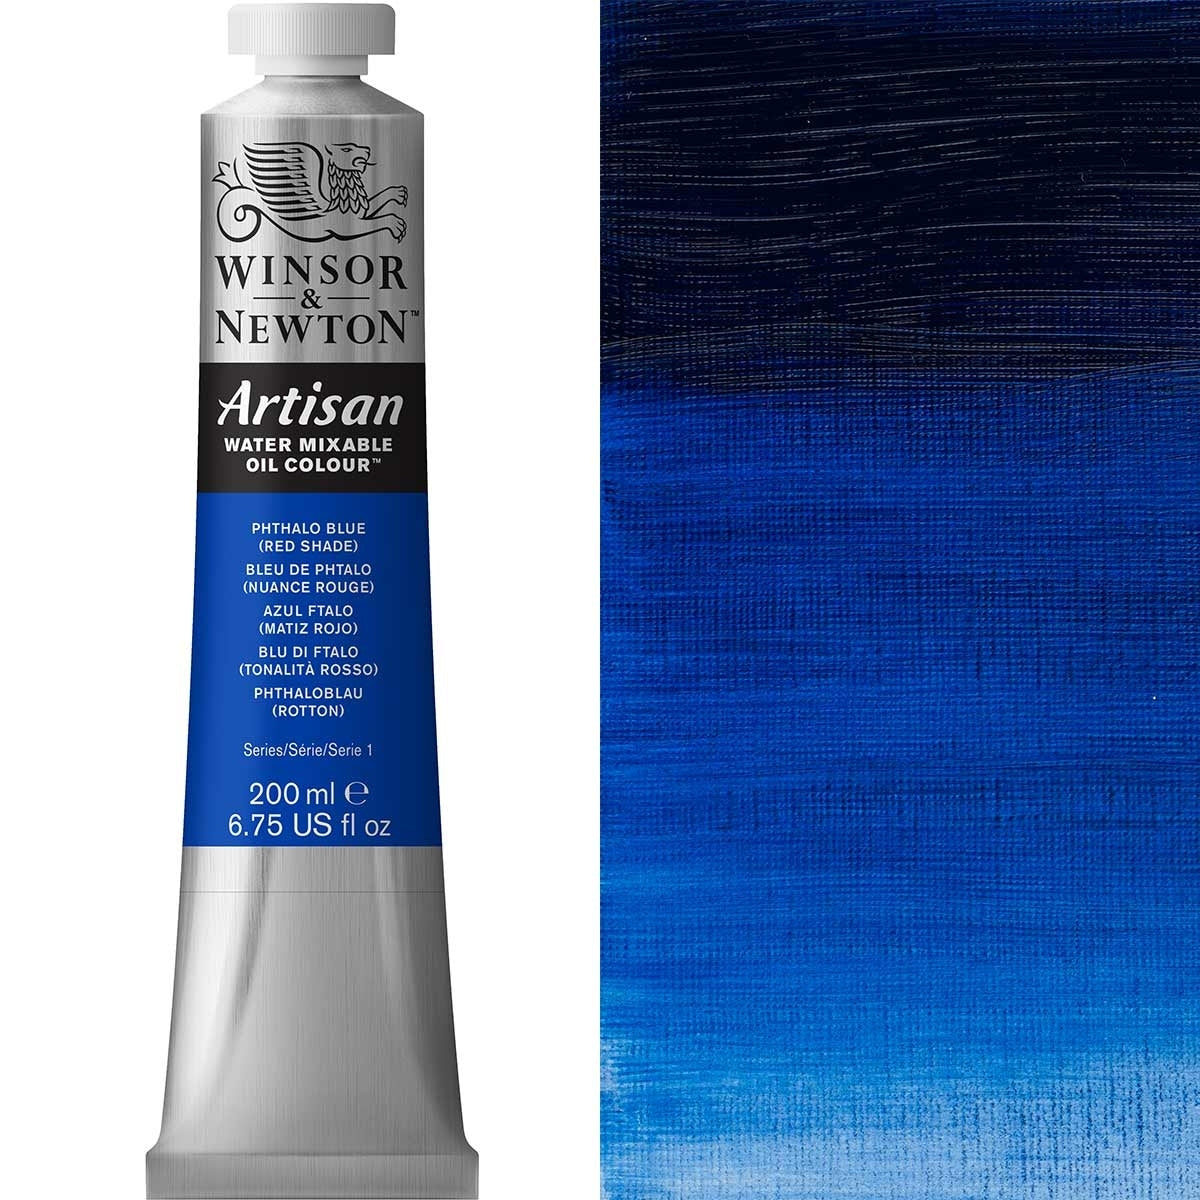 Winsor en Newton - Artisan Oil Color Water Mixable - 200 ml - Phthalo Blue Red Shade